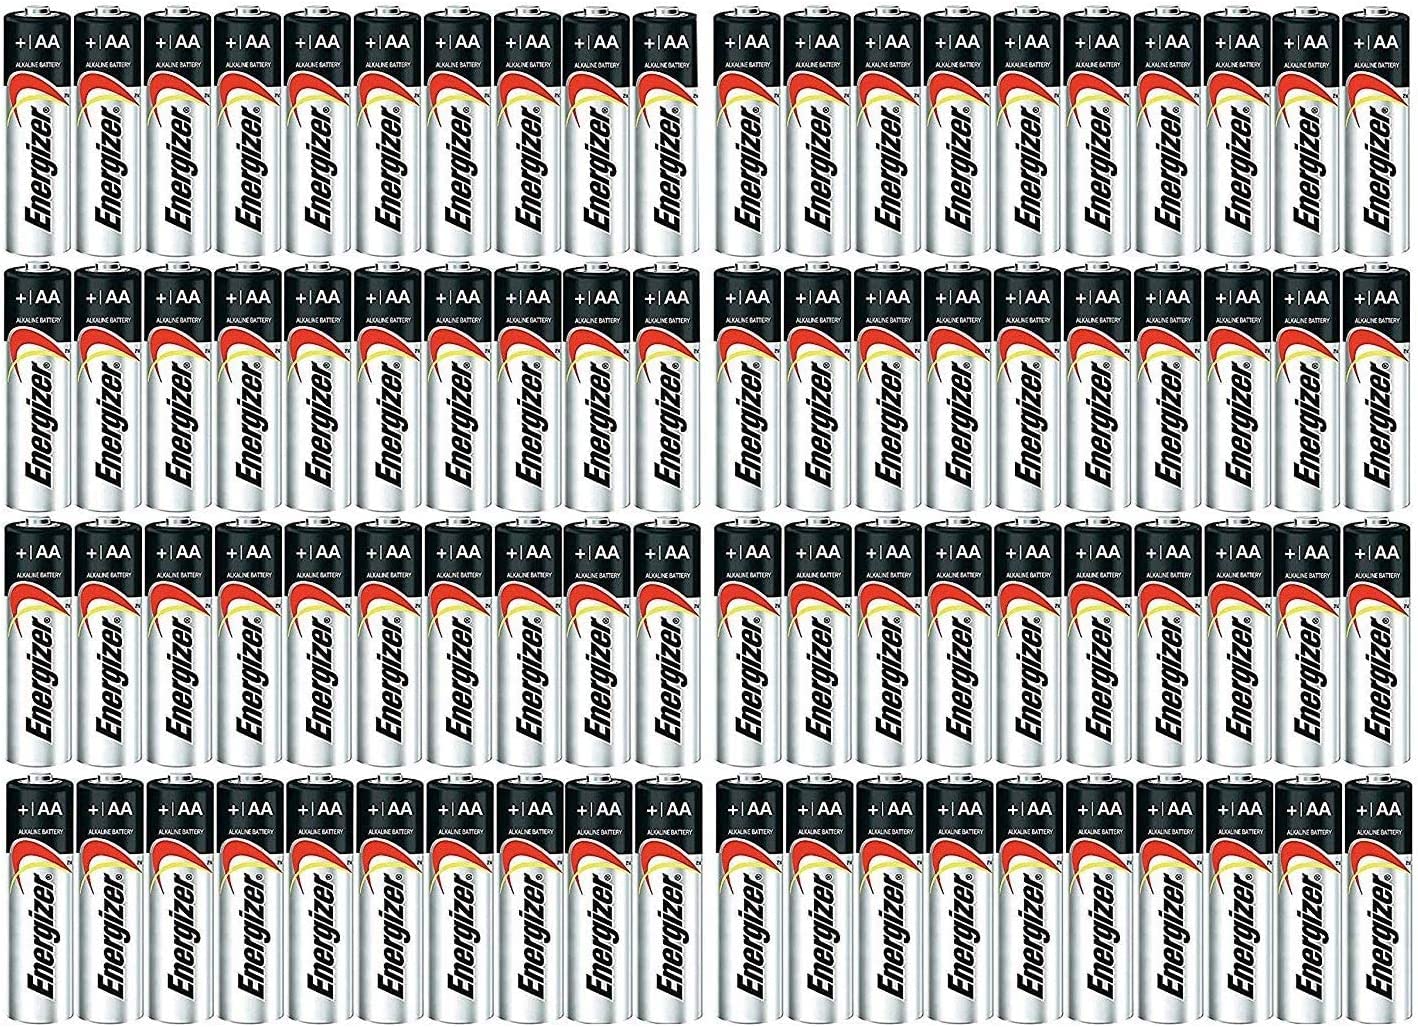 Energizer Max Alkaline Batteries, AA, Pack of 144 - image 1 of 5